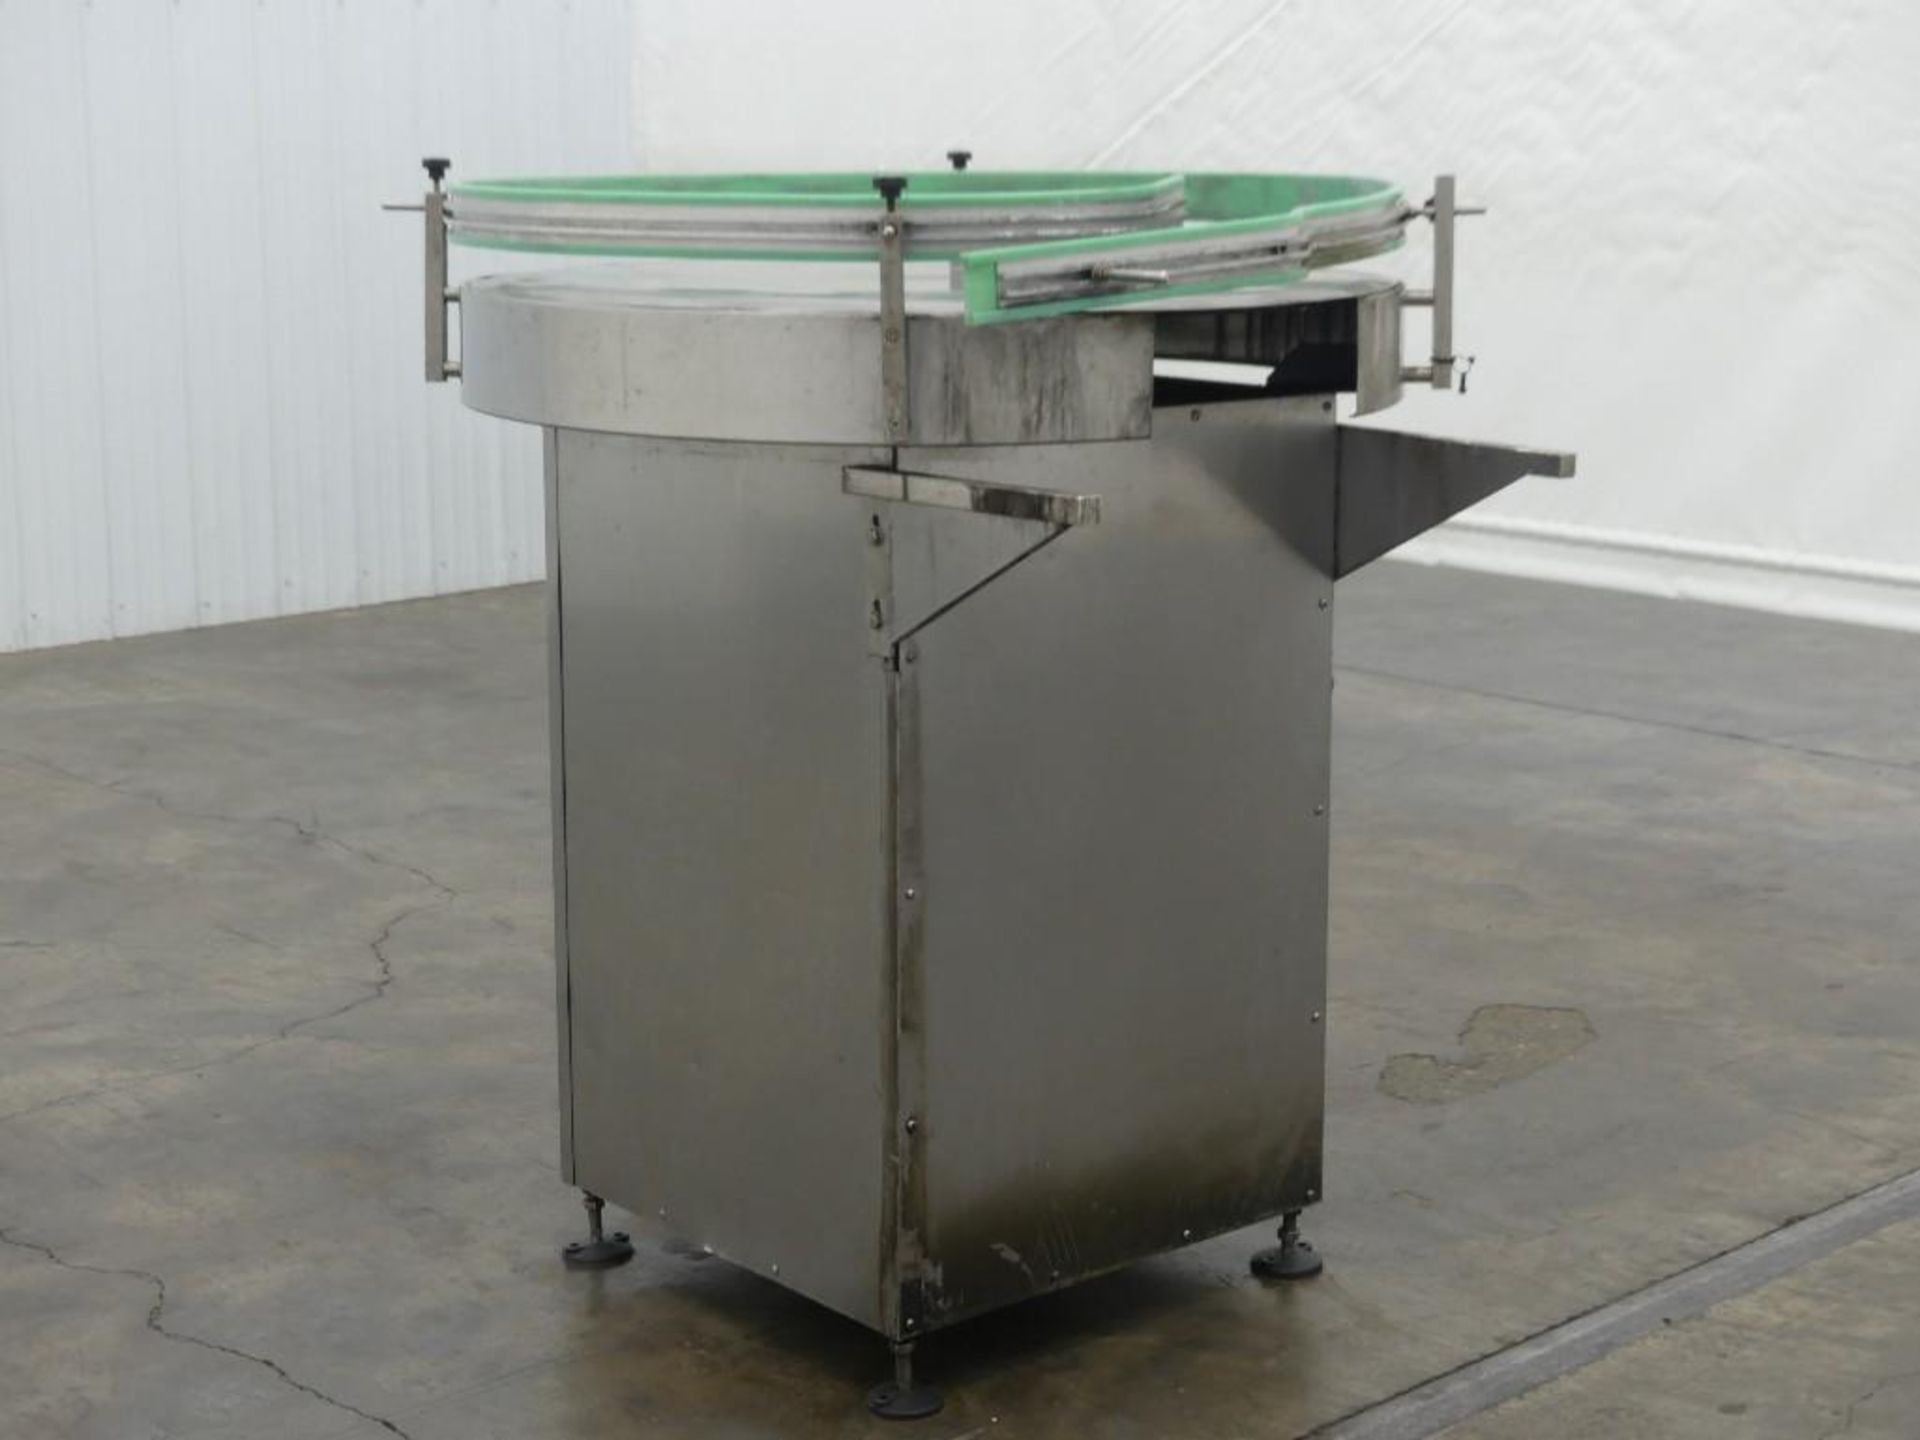 Rotary Accumulation Table-38" - Image 3 of 7